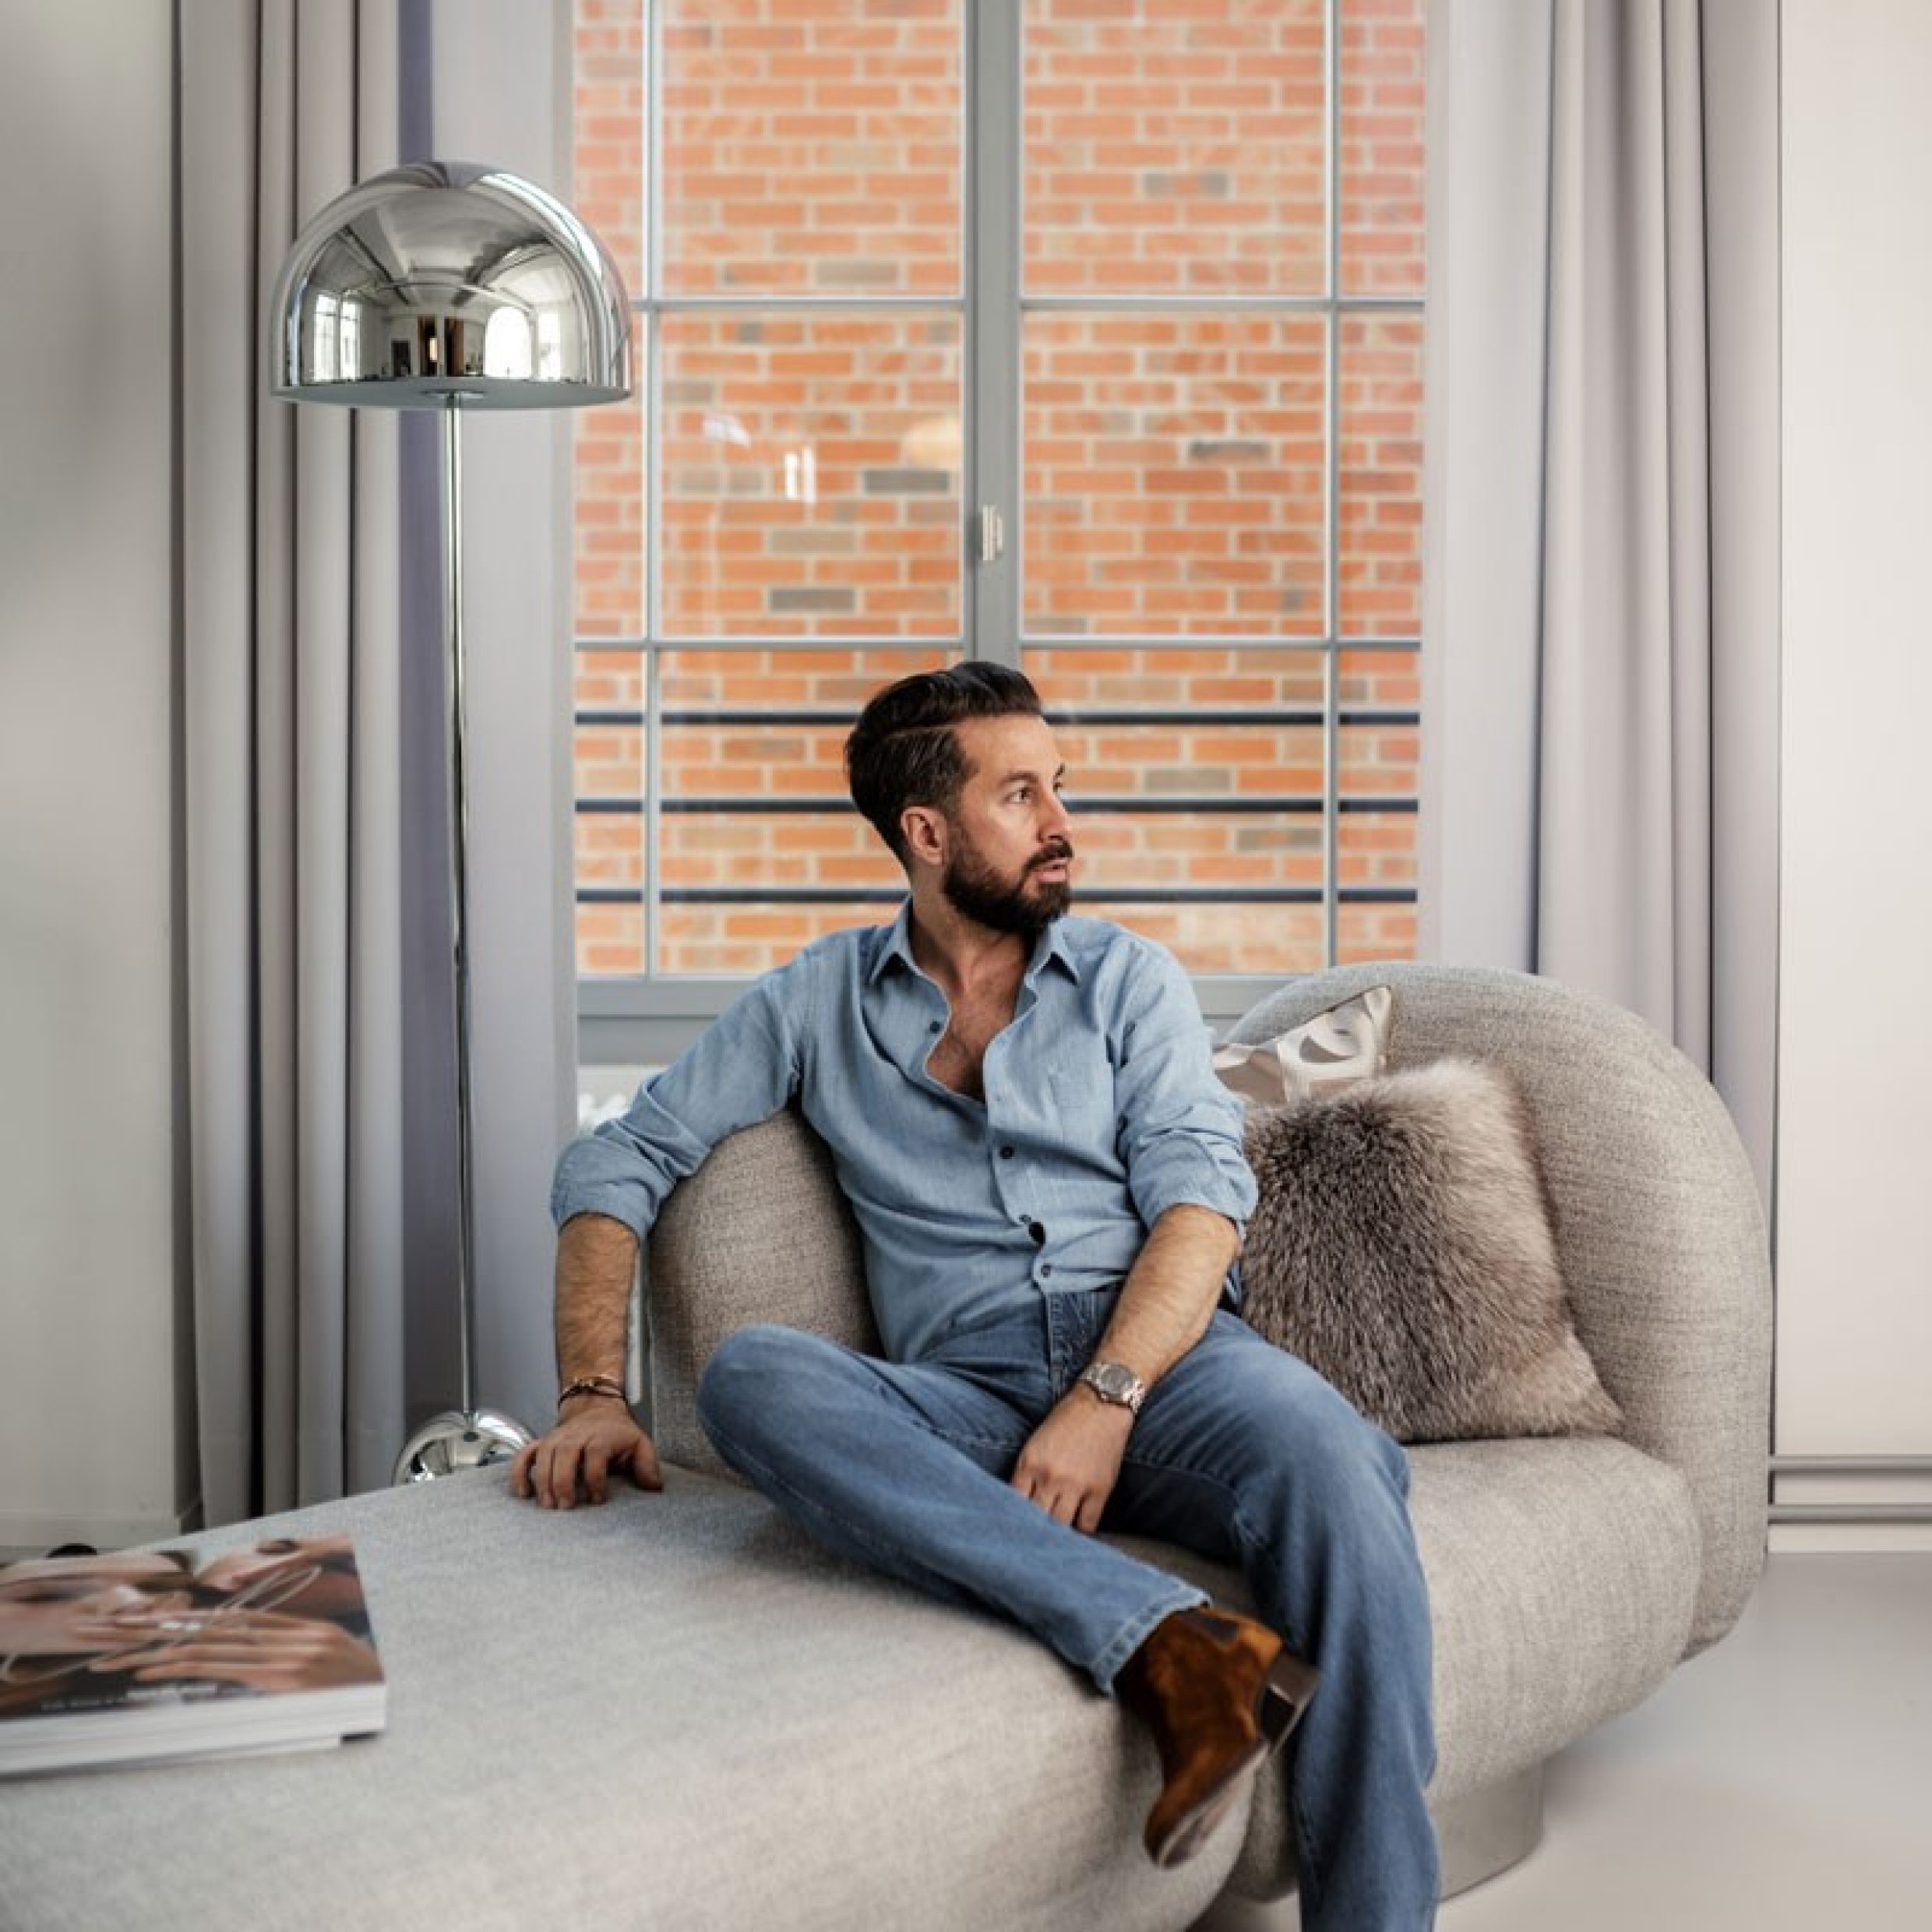 A dark-haired man in a denim shirt and jeans and suede leather boots sits on a beige sofa and peers thoughtfully to the side. The room is stylishly furnished, with elements that are perfectly matched.